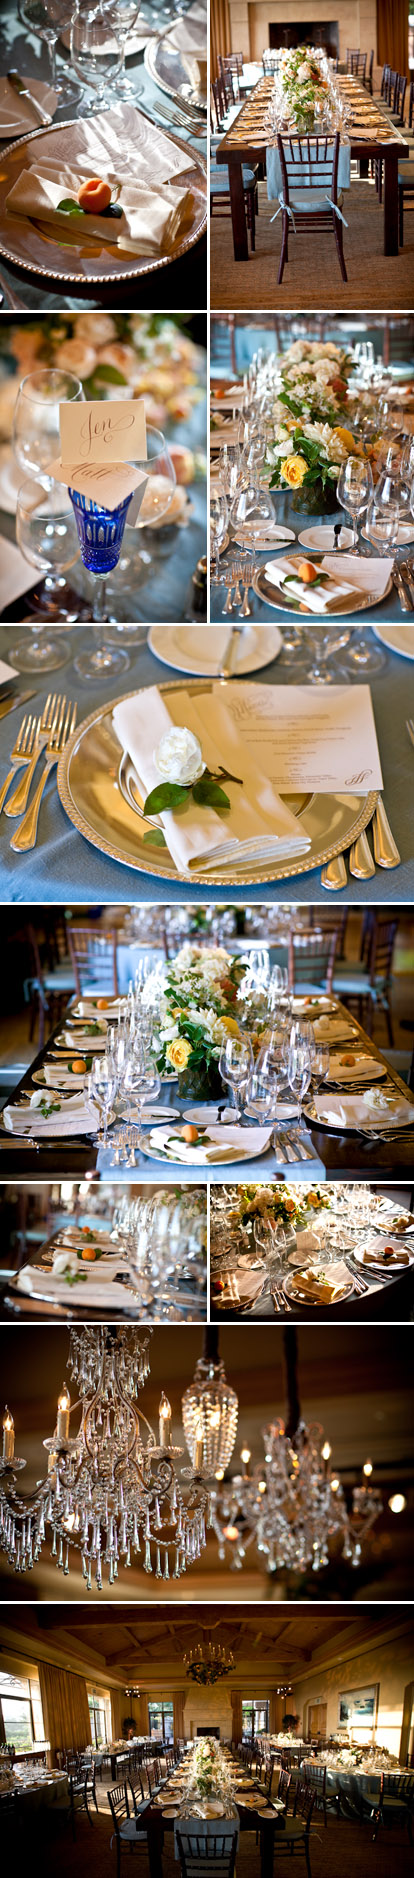 Teal, peach and metallic rose gold vrustic vintage wedding table tops, real wedding decor at The Resort at Pelican Hill, images by Jay Lawrence Goldman